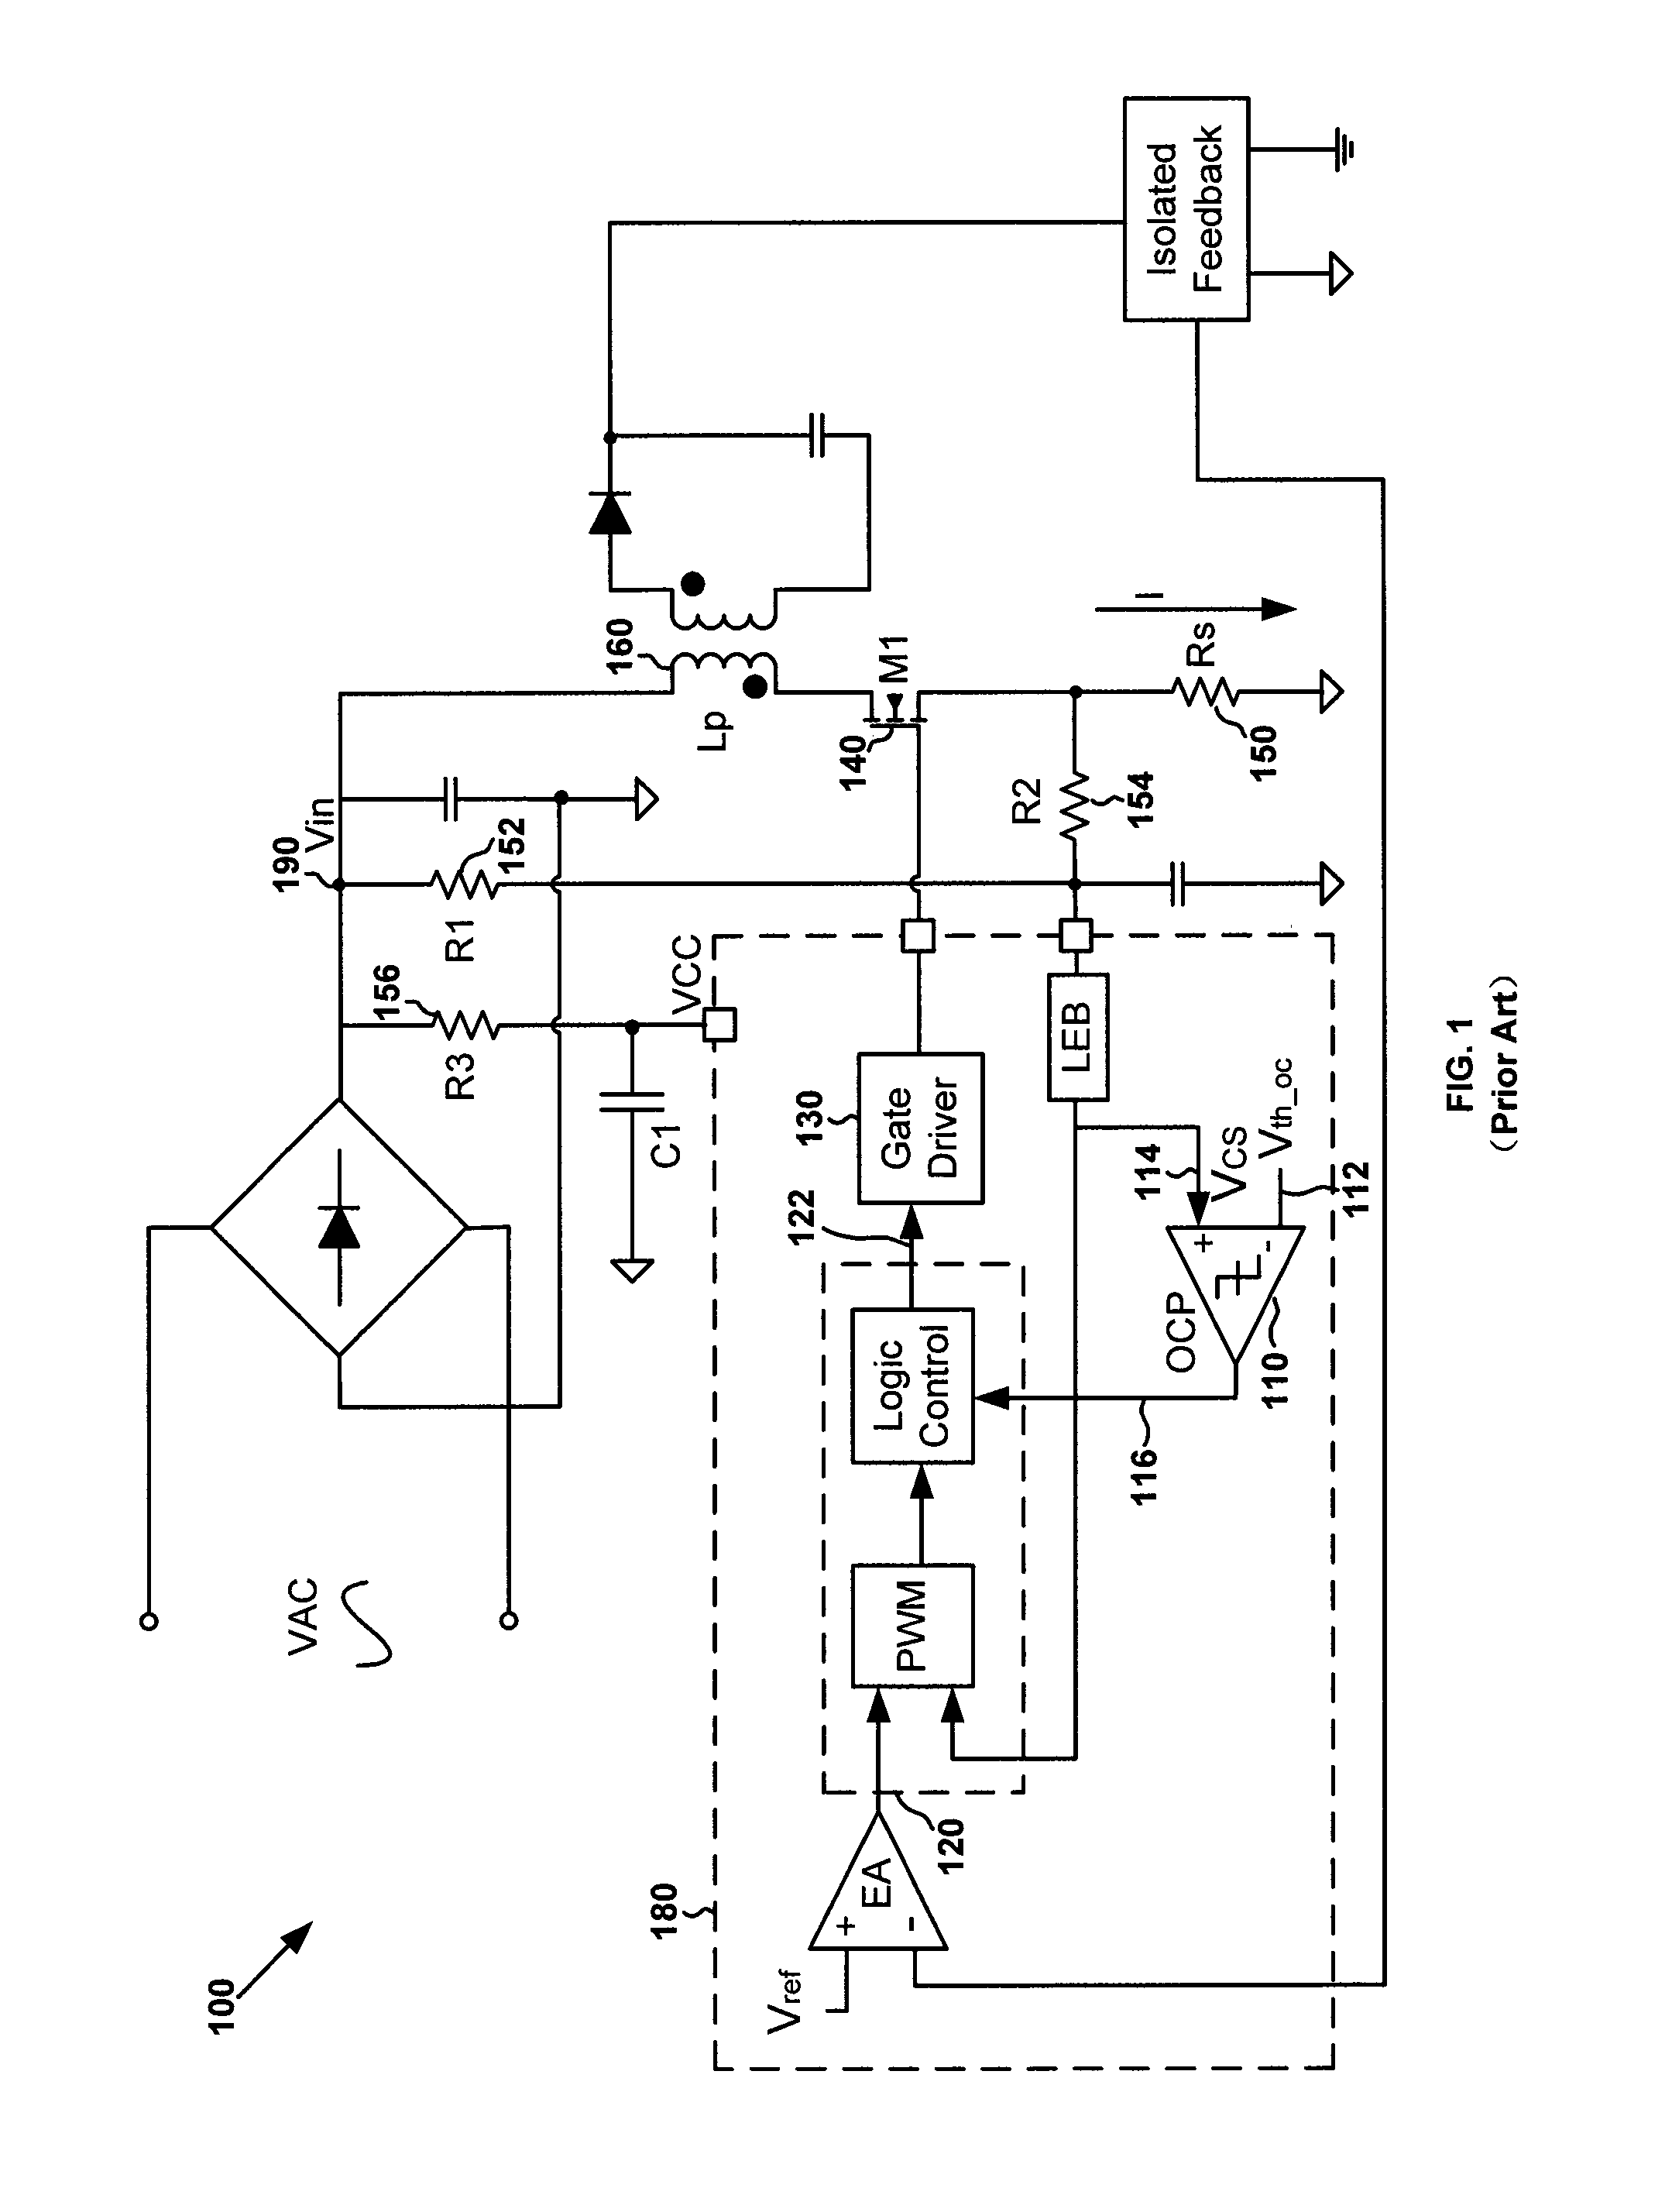 System and Method Providing Reliable Over Current Protection for Power Converter